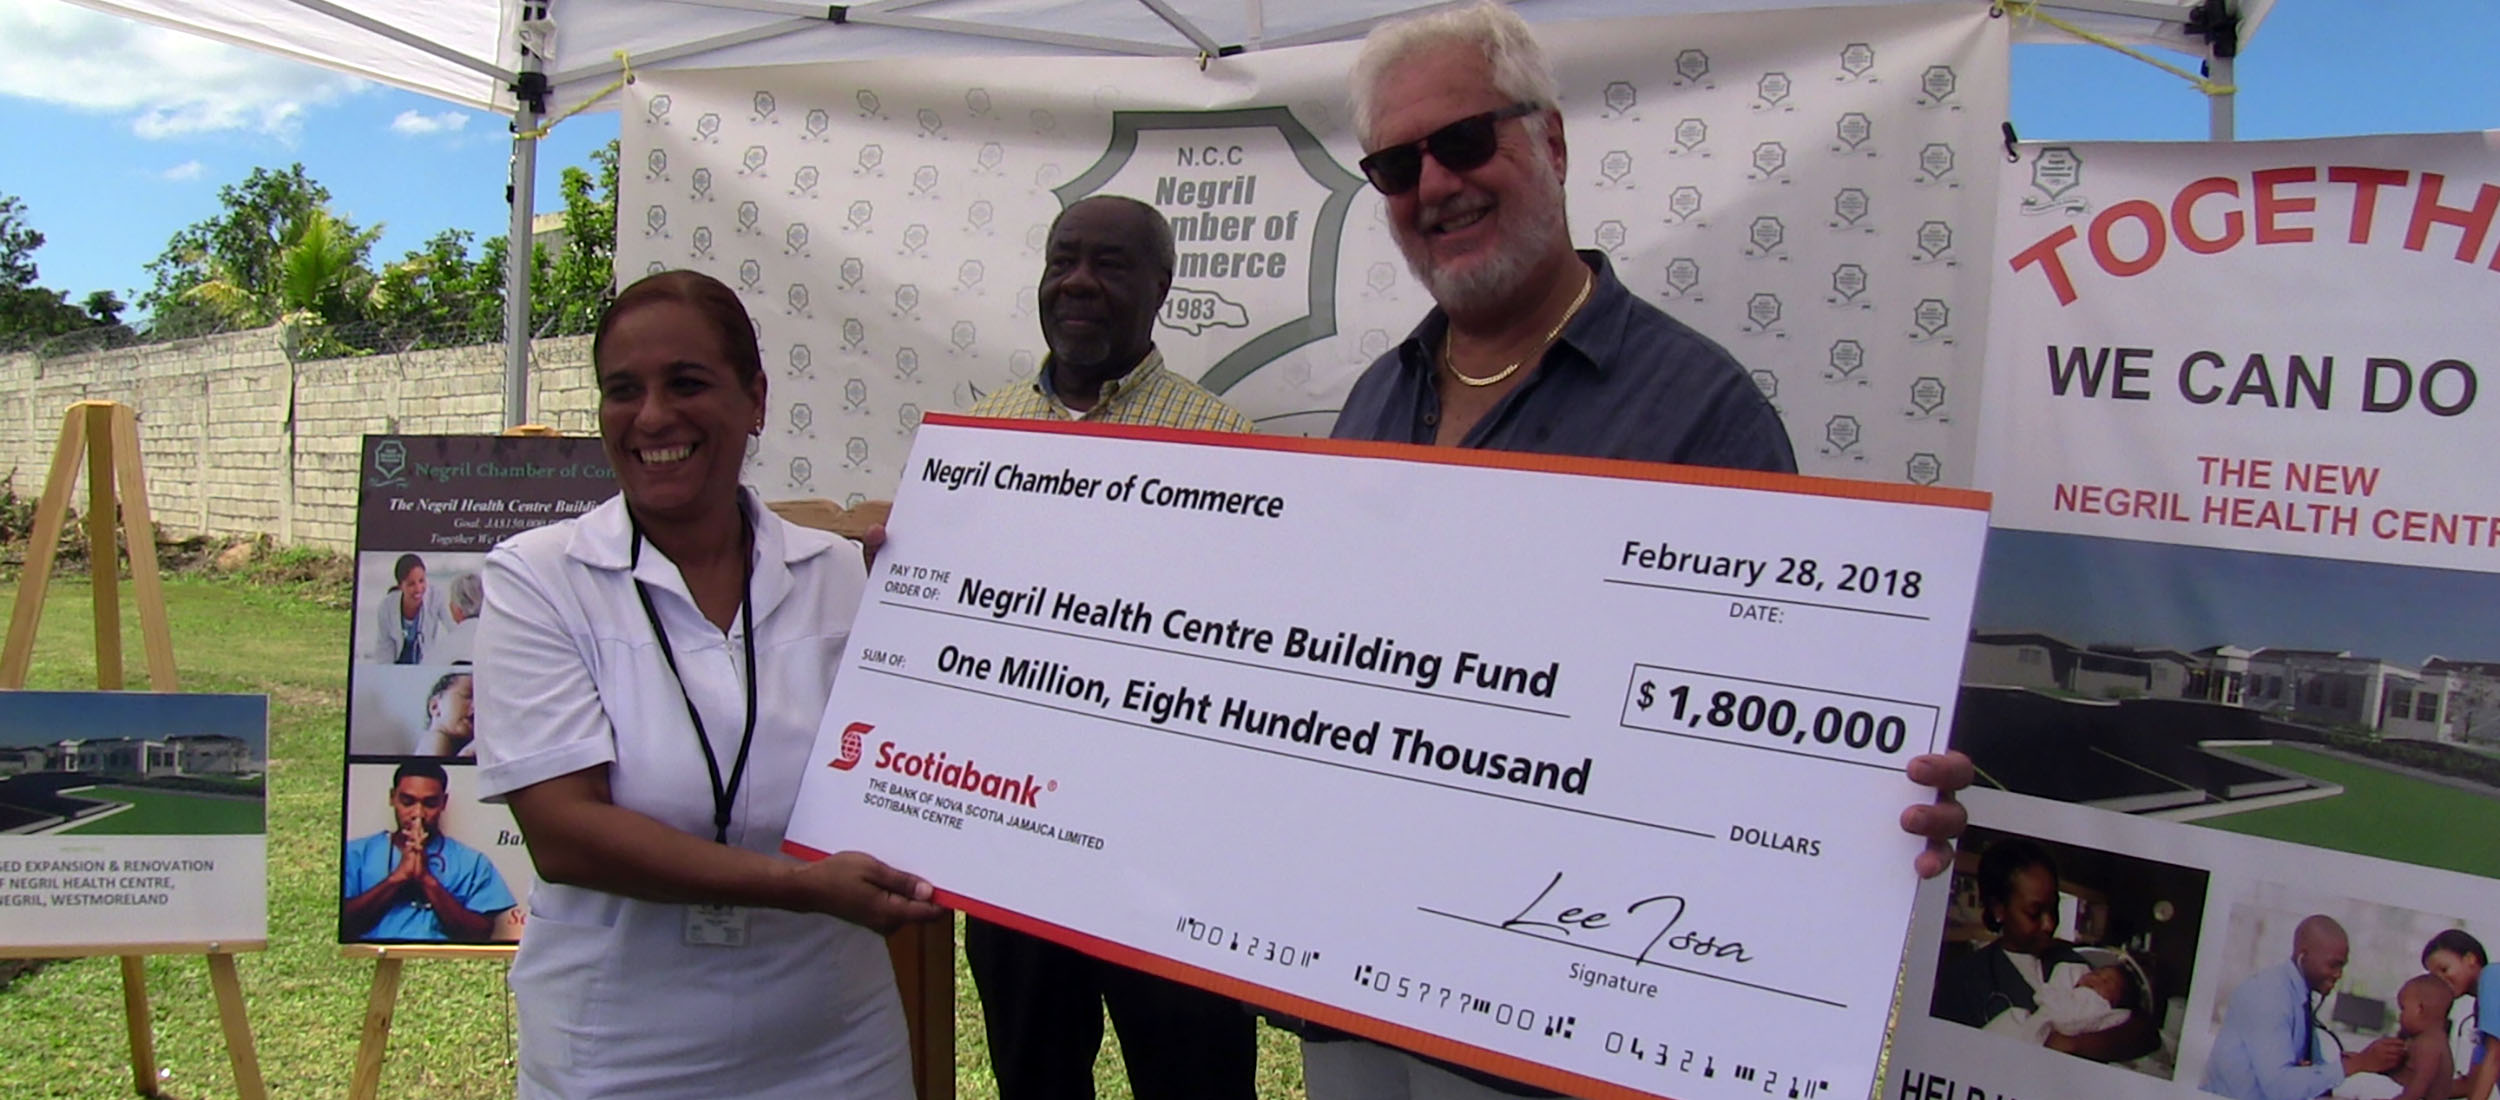 Lee Issa presents 1.8 million check to Negril Community Centre Fund